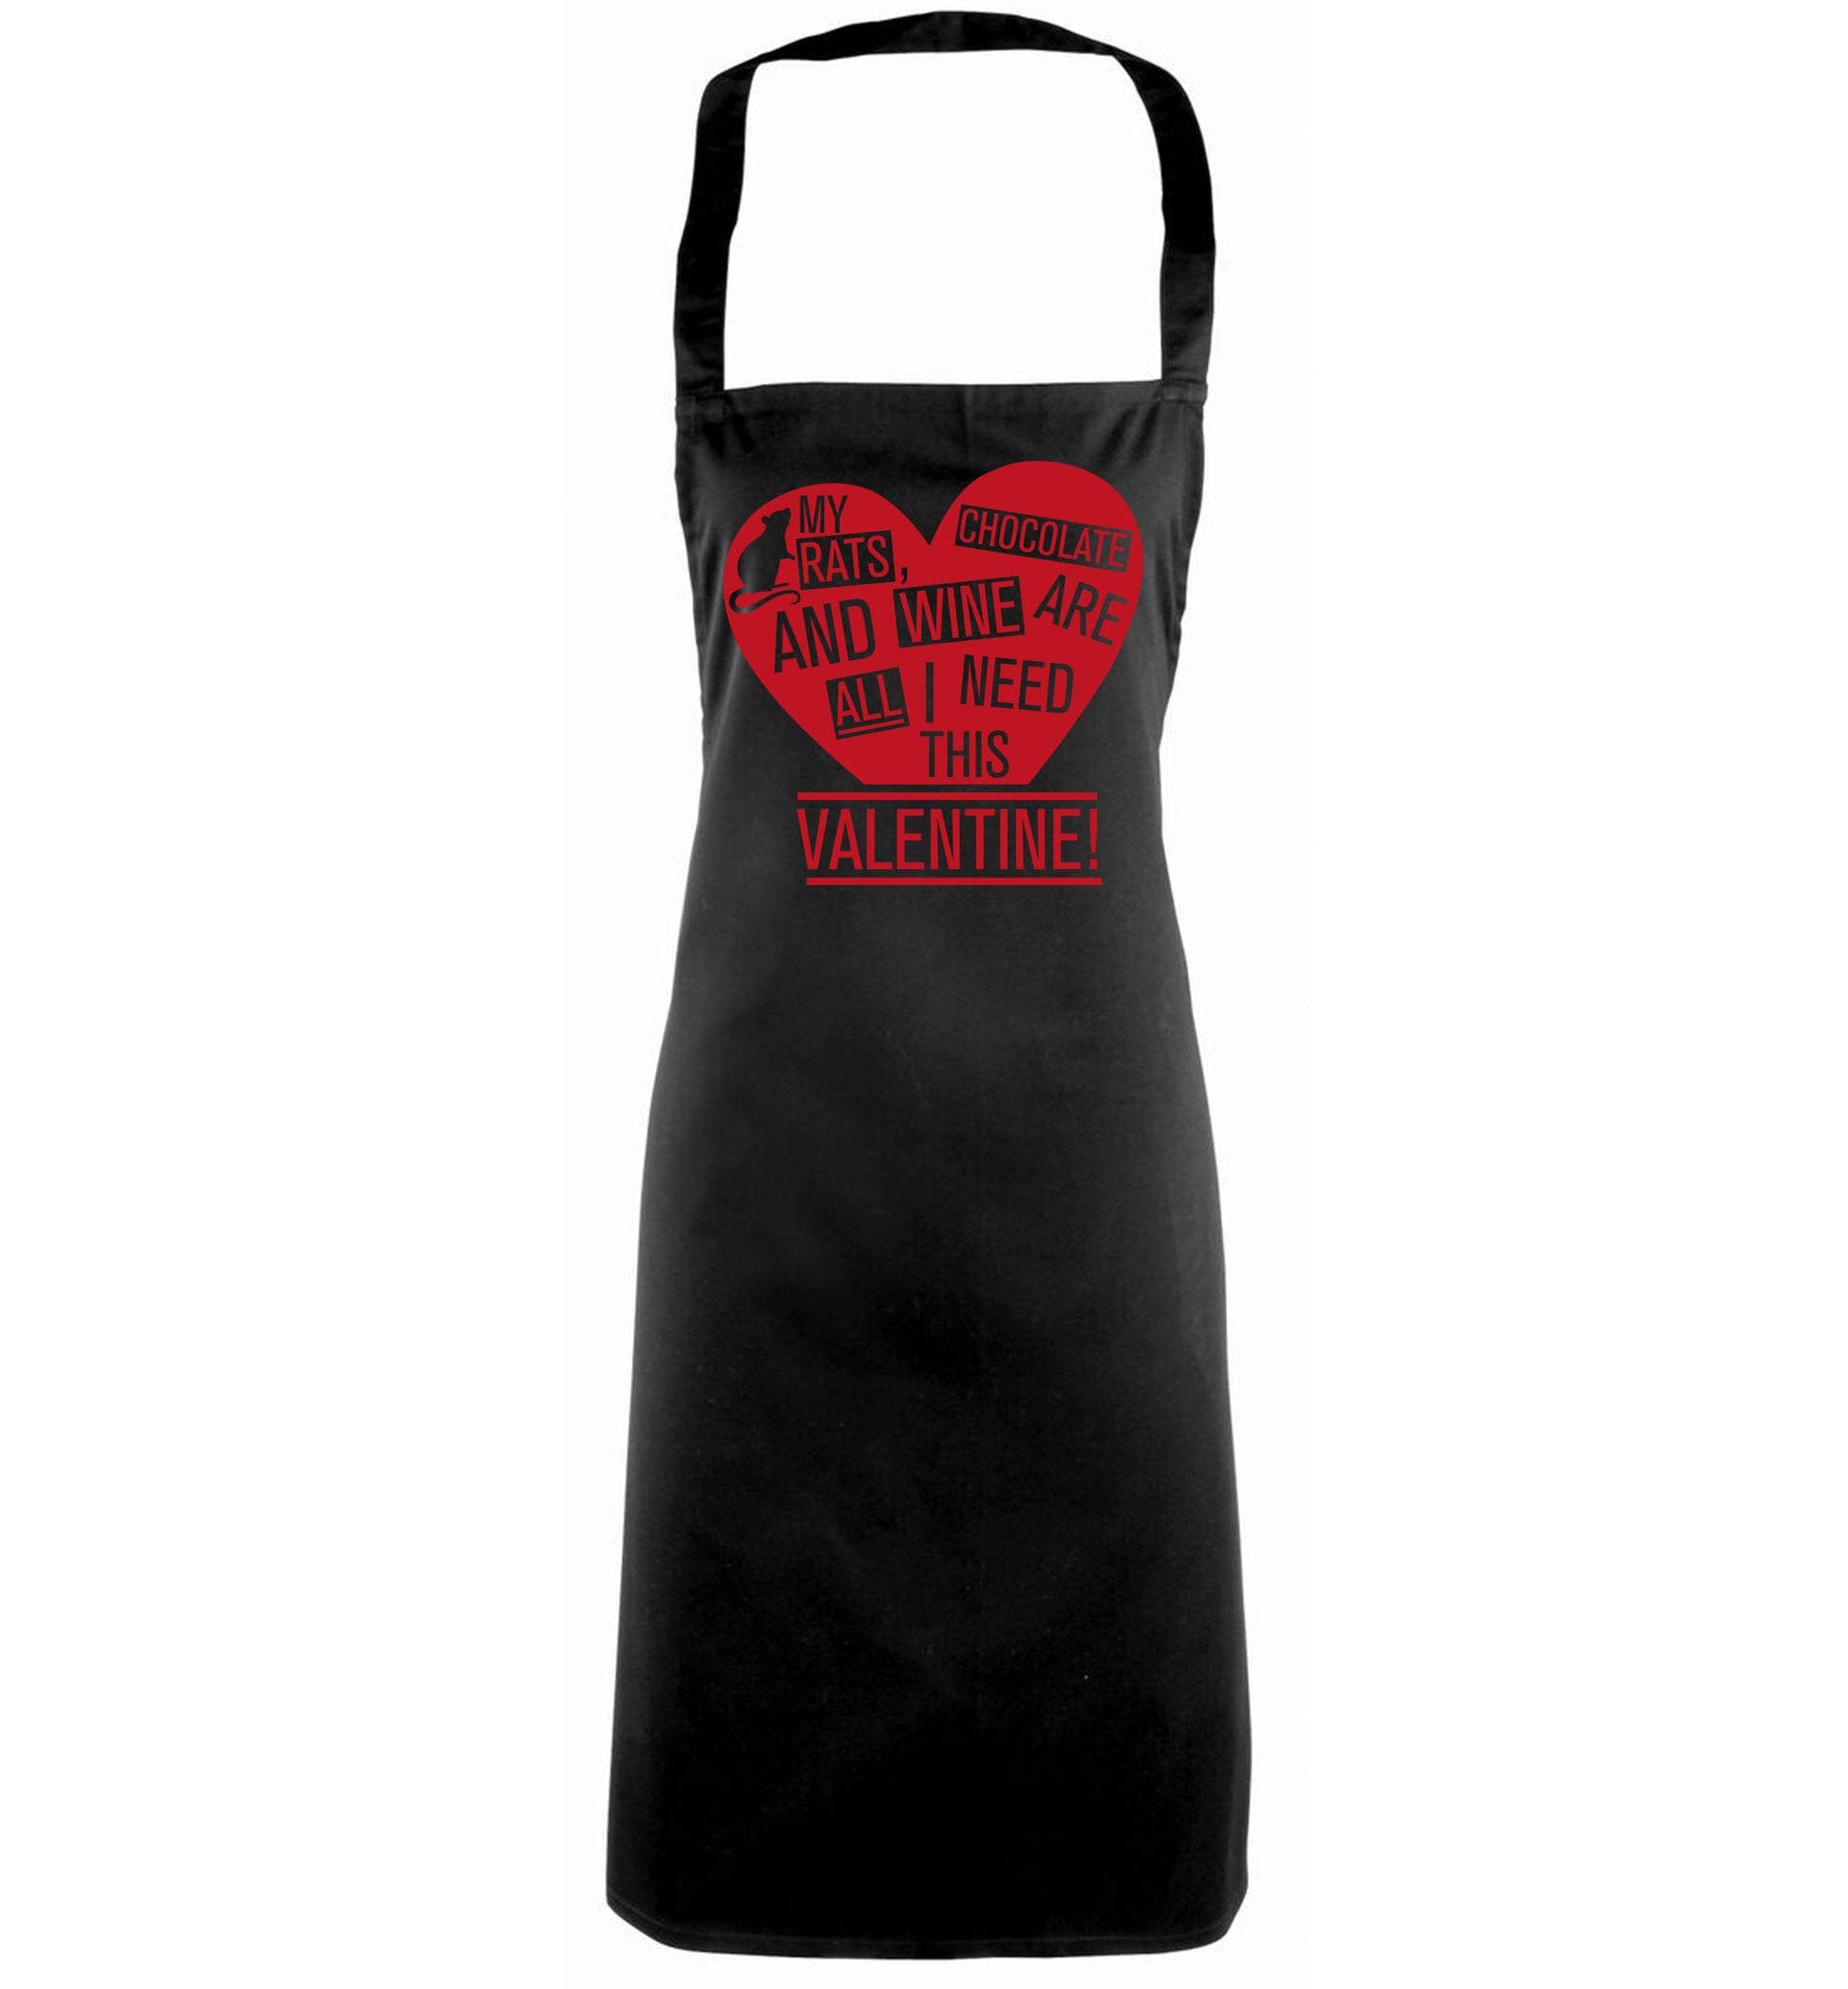 My rats, chocolate and wine are all I need this valentine! black apron